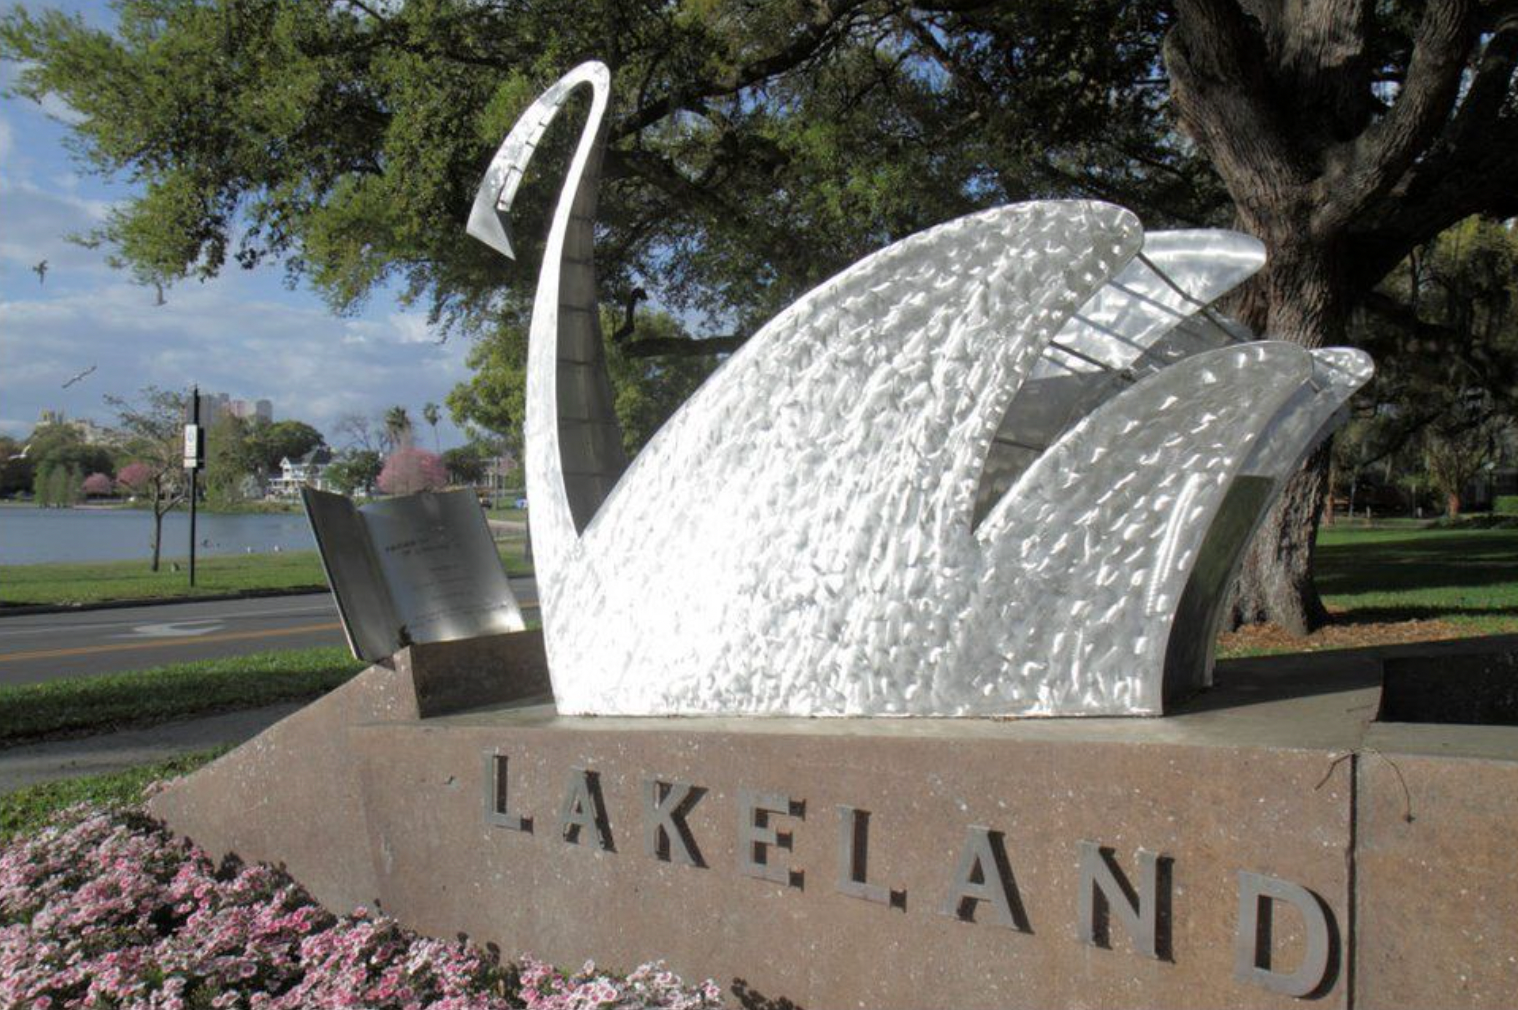 Swan statue sign of Lakeland in Central Florida